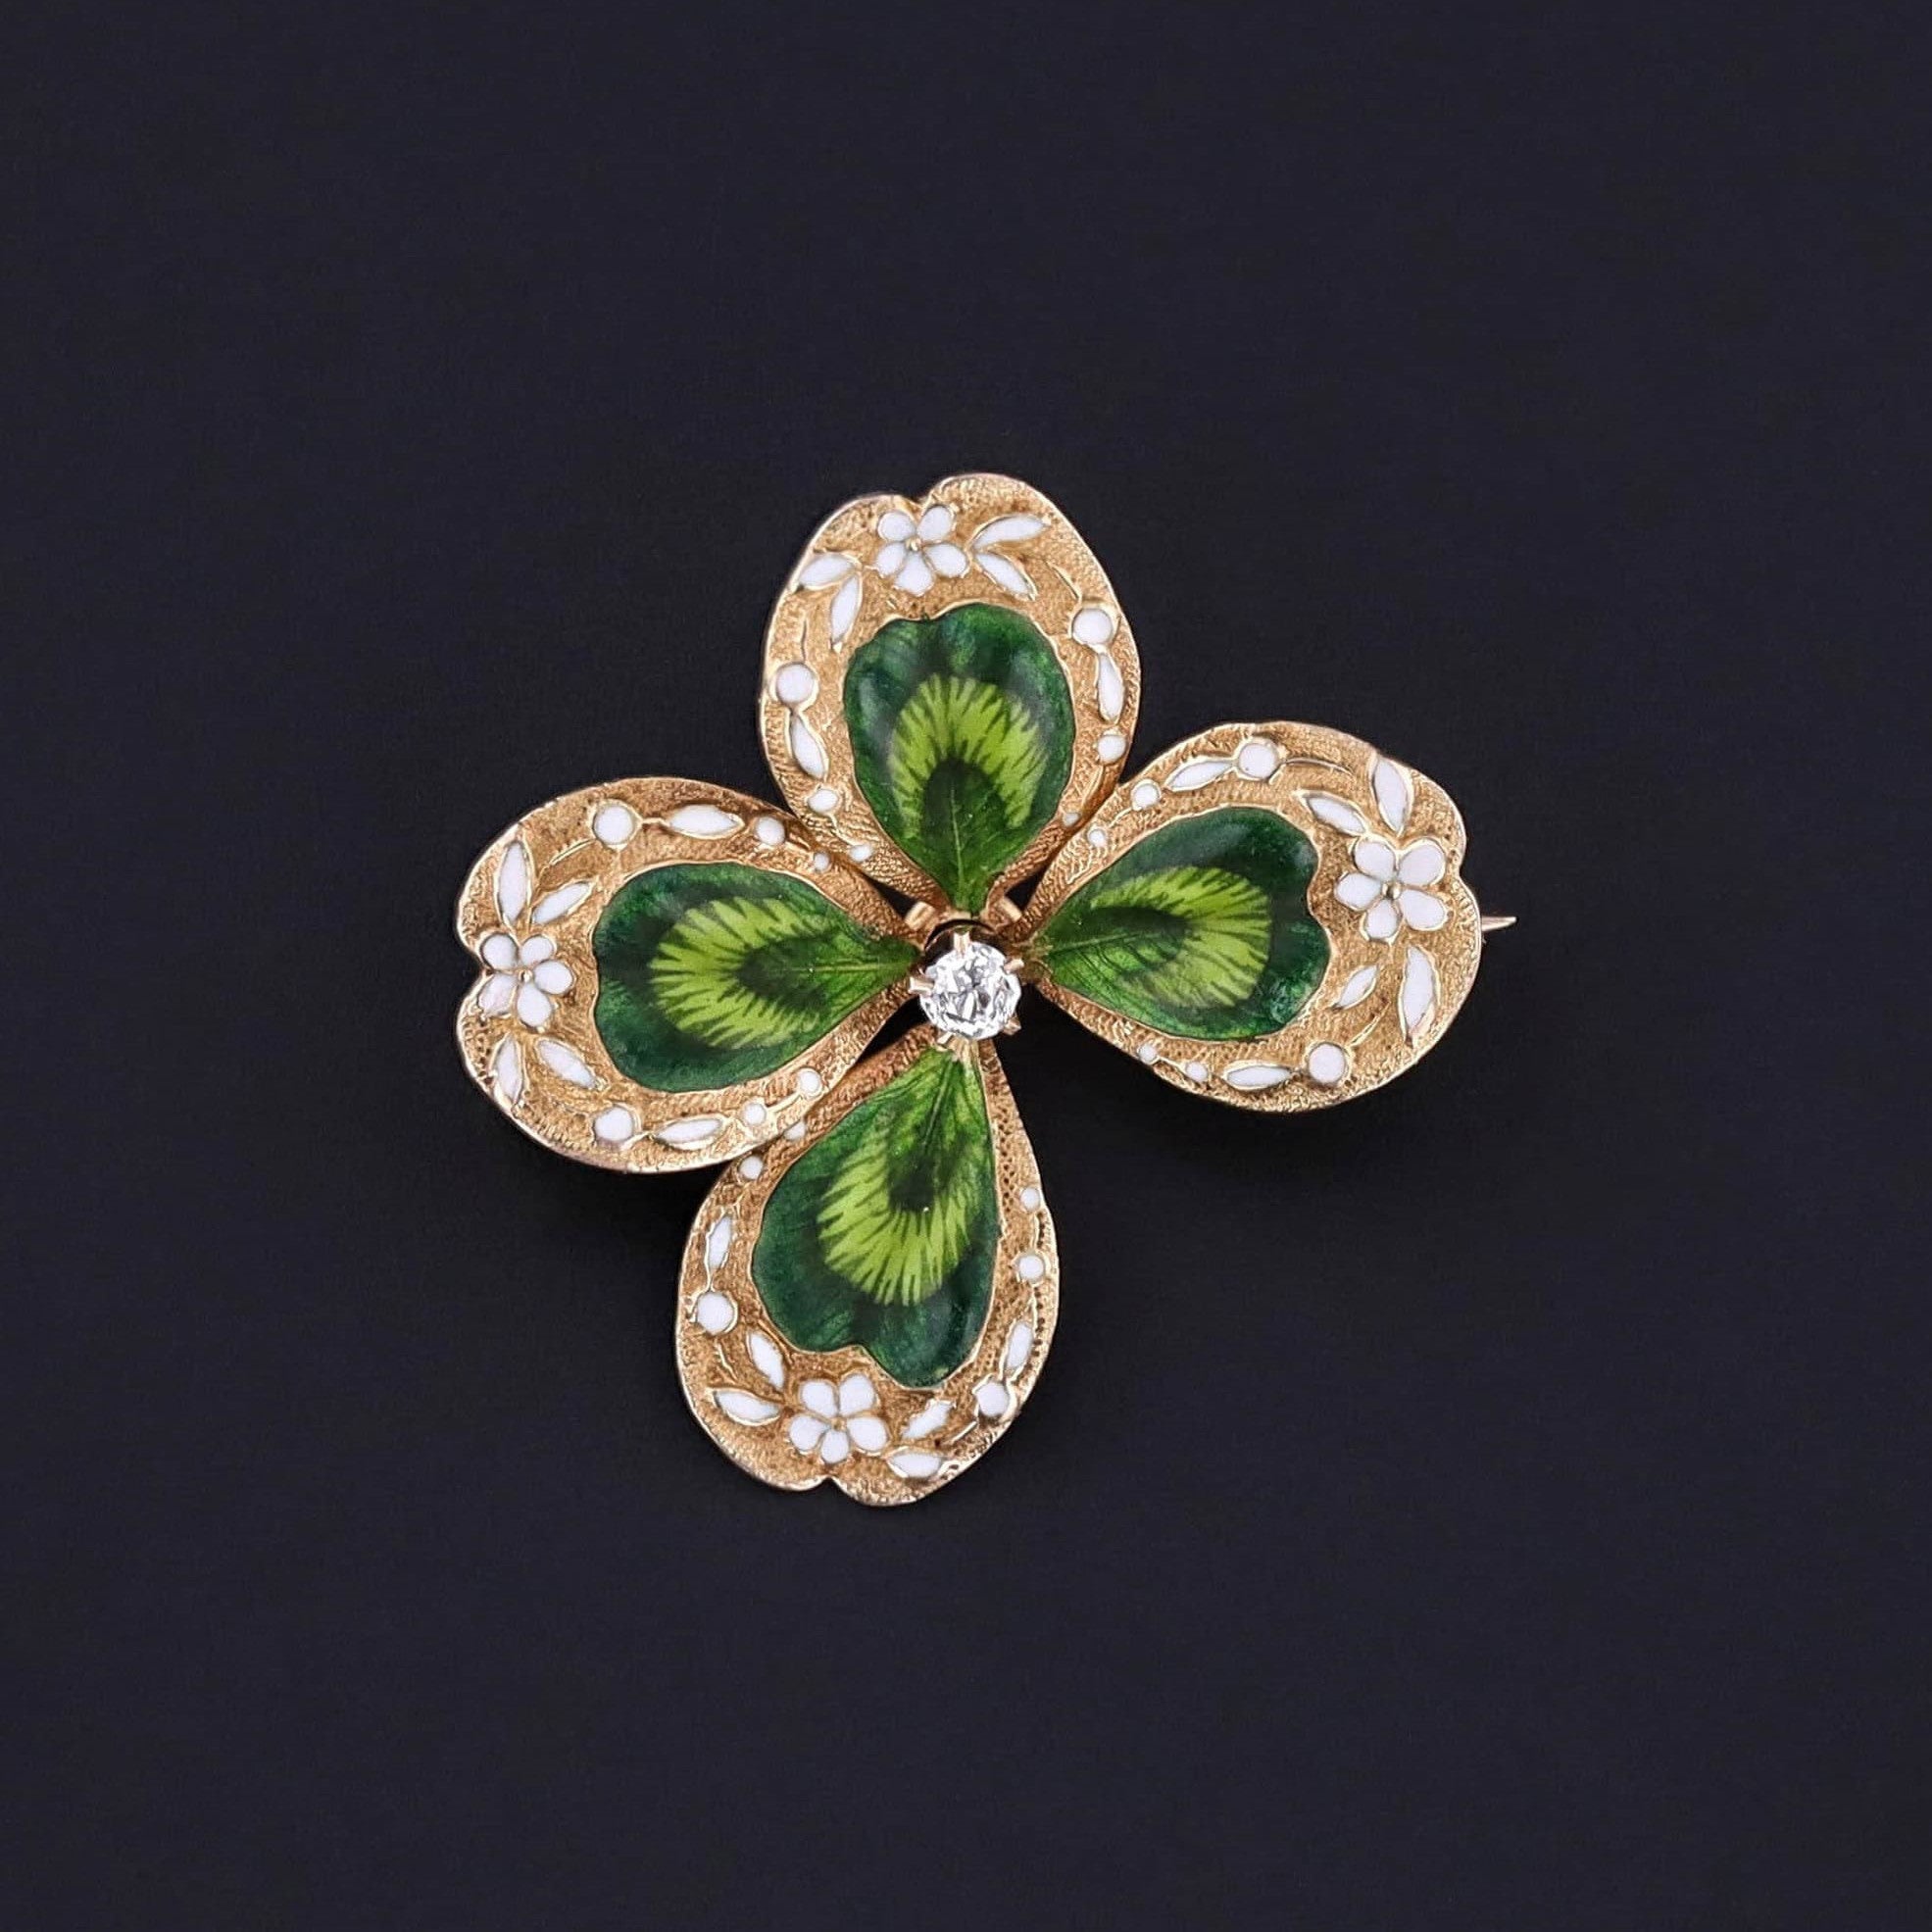 An antique enamel clover brooch by Krementz and Company dating to the early 1900s. The brooch is in excellent condition with green and white enamel and a glittery diamond accent. It is 14k gold and great for any jewelry collector.